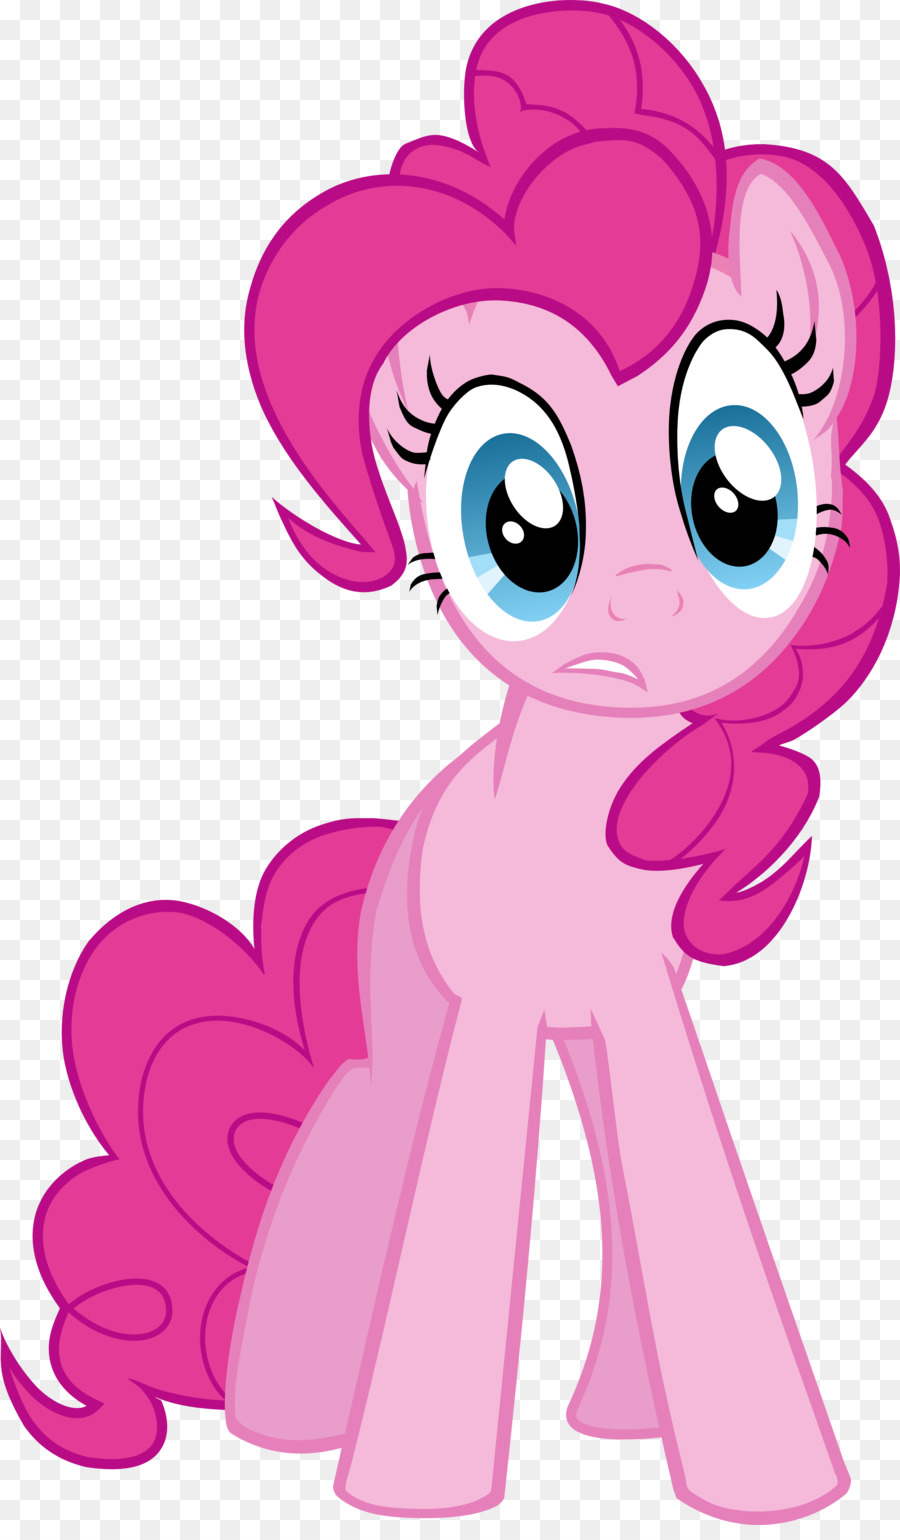 Pinkie Pie Rarity Twilight Sparkle - beauty and the beast vector png download - 900*1525 - Free Transparent  png Download.